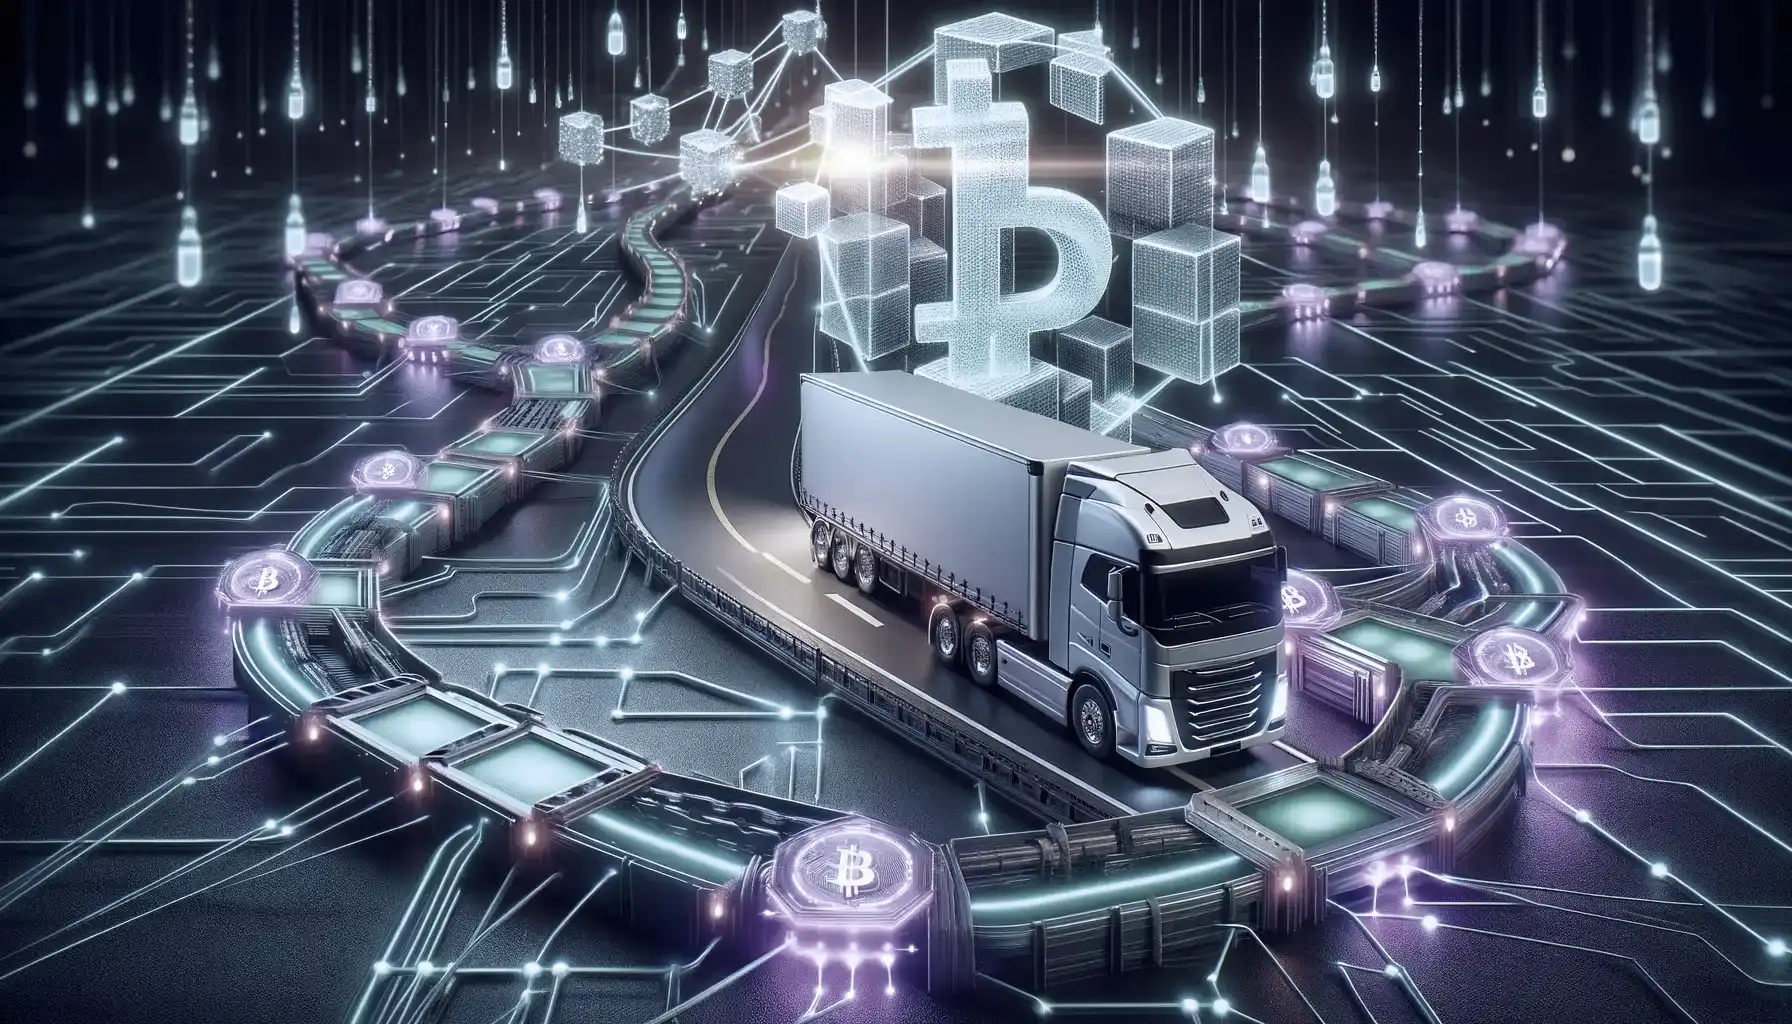 This image depicts a concept for integrating blockchain technology in supply chain management, suitable for a blockchain solutions landing page. It features a modern, detailed freight truck driving along a path that is seamlessly intertwined with a blockchain network. The blocks within this network are vividly connected with green and purple neon lights, symbolizing the secure and efficient linkage that blockchain technology brings to supply chain operations. The combination of the physical truck and the digitally enhanced blockchain network illustrates the merging of traditional supply chain logistics with advanced digital solutions. The background merges digital elements with industrial motifs, reinforcing the theme of technology enhancing conventional supply chain processes.